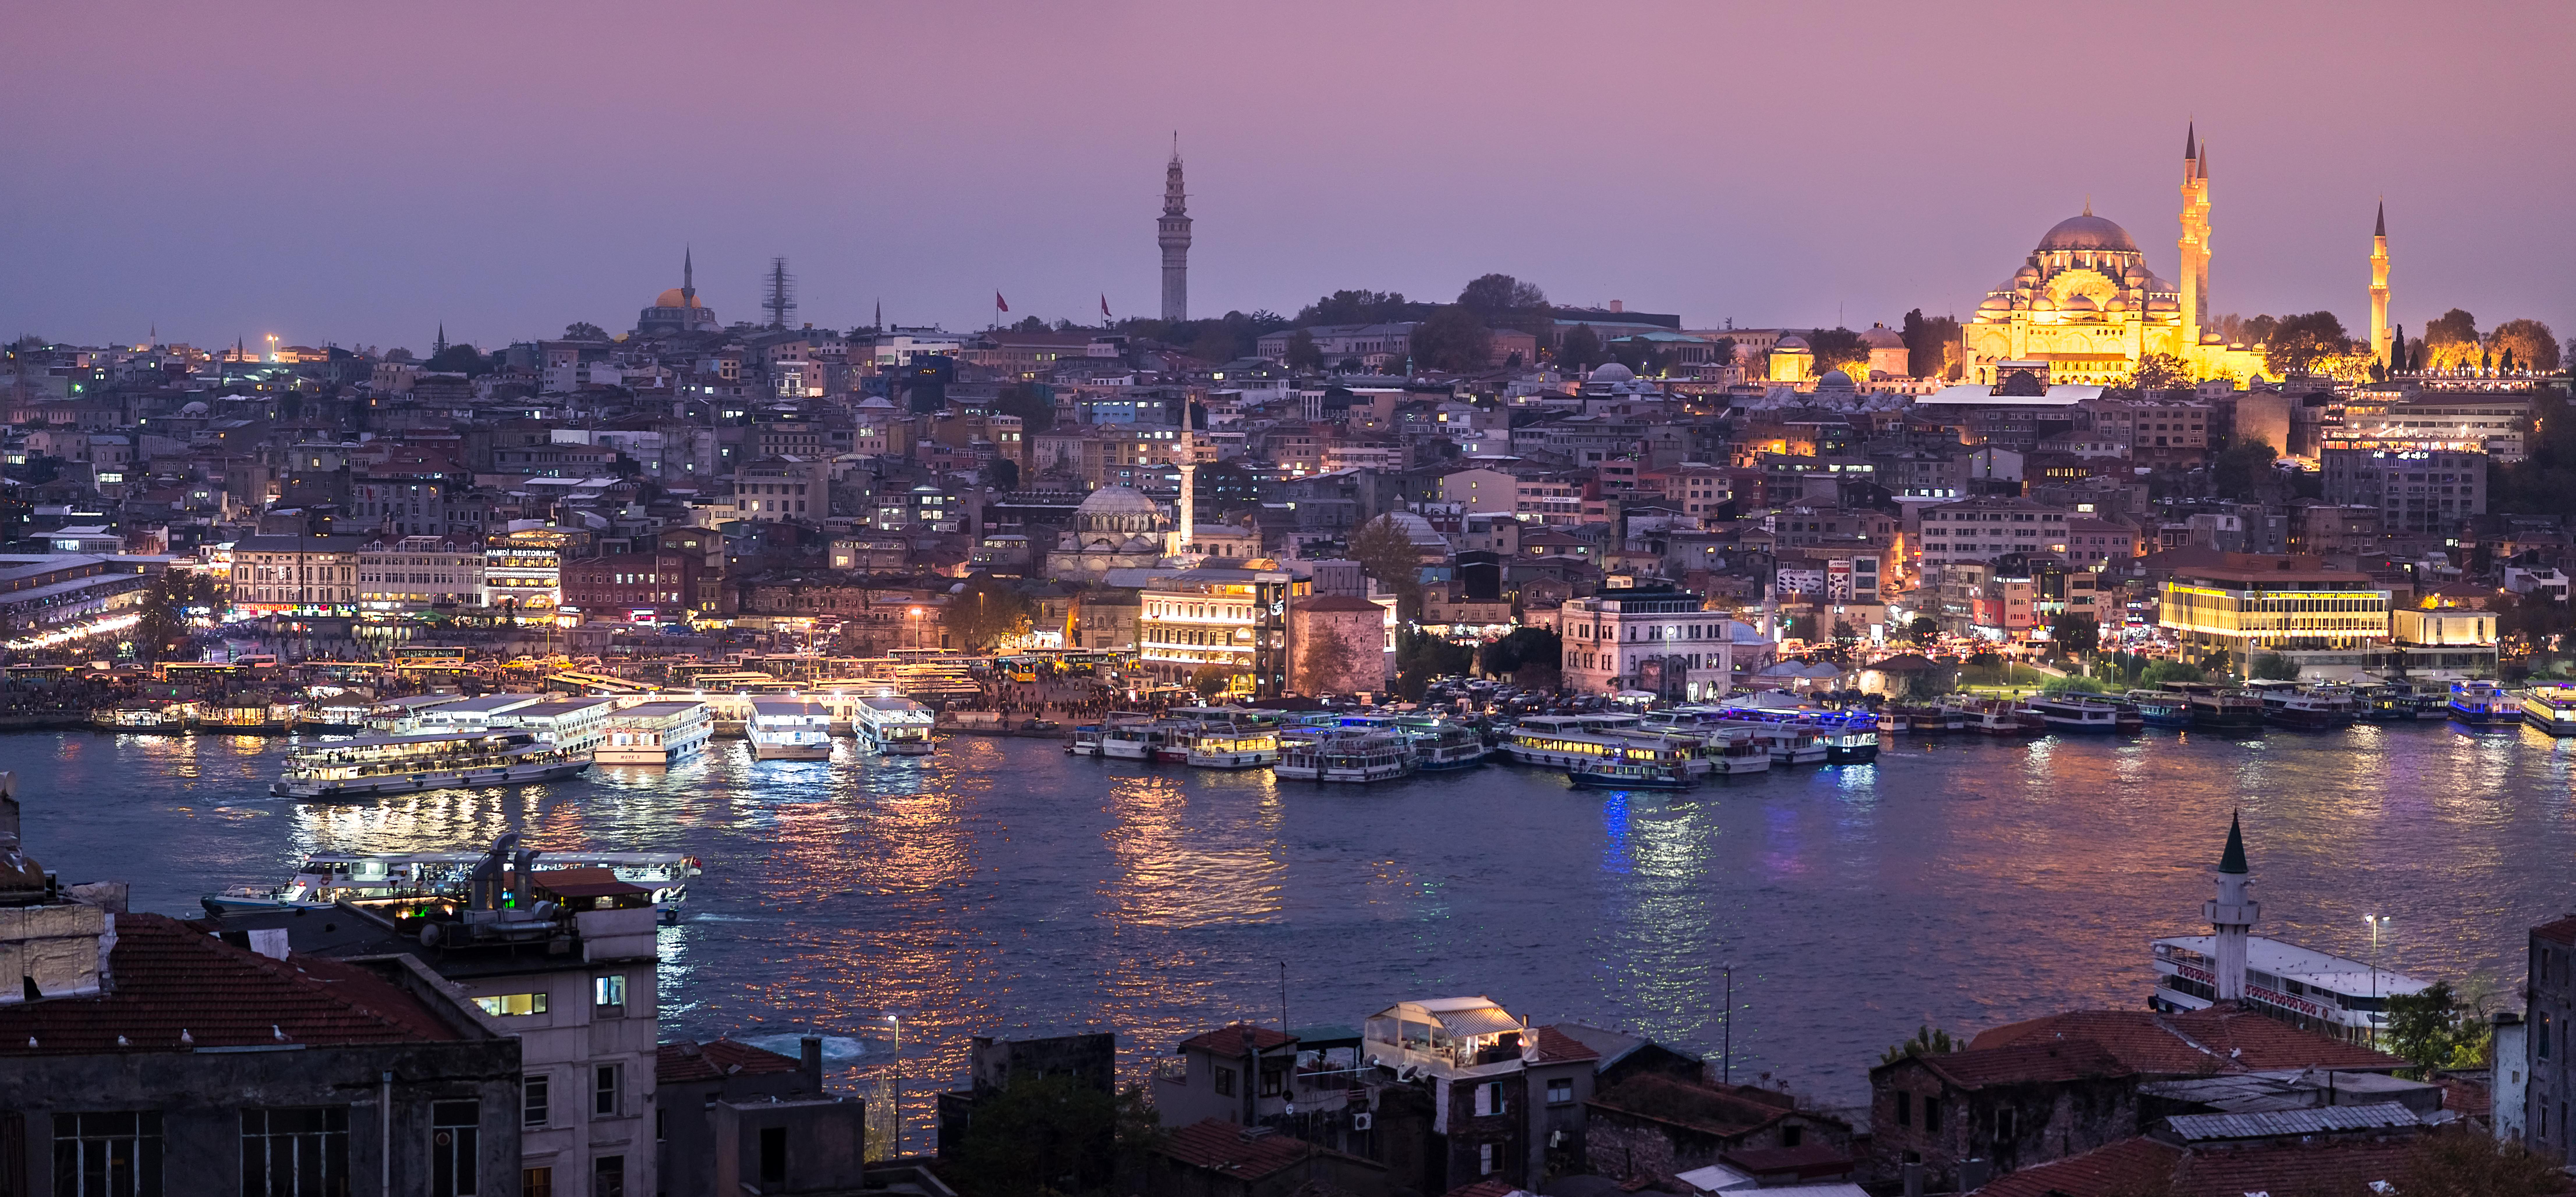 Istanbul Wallpaper Pictures Image For